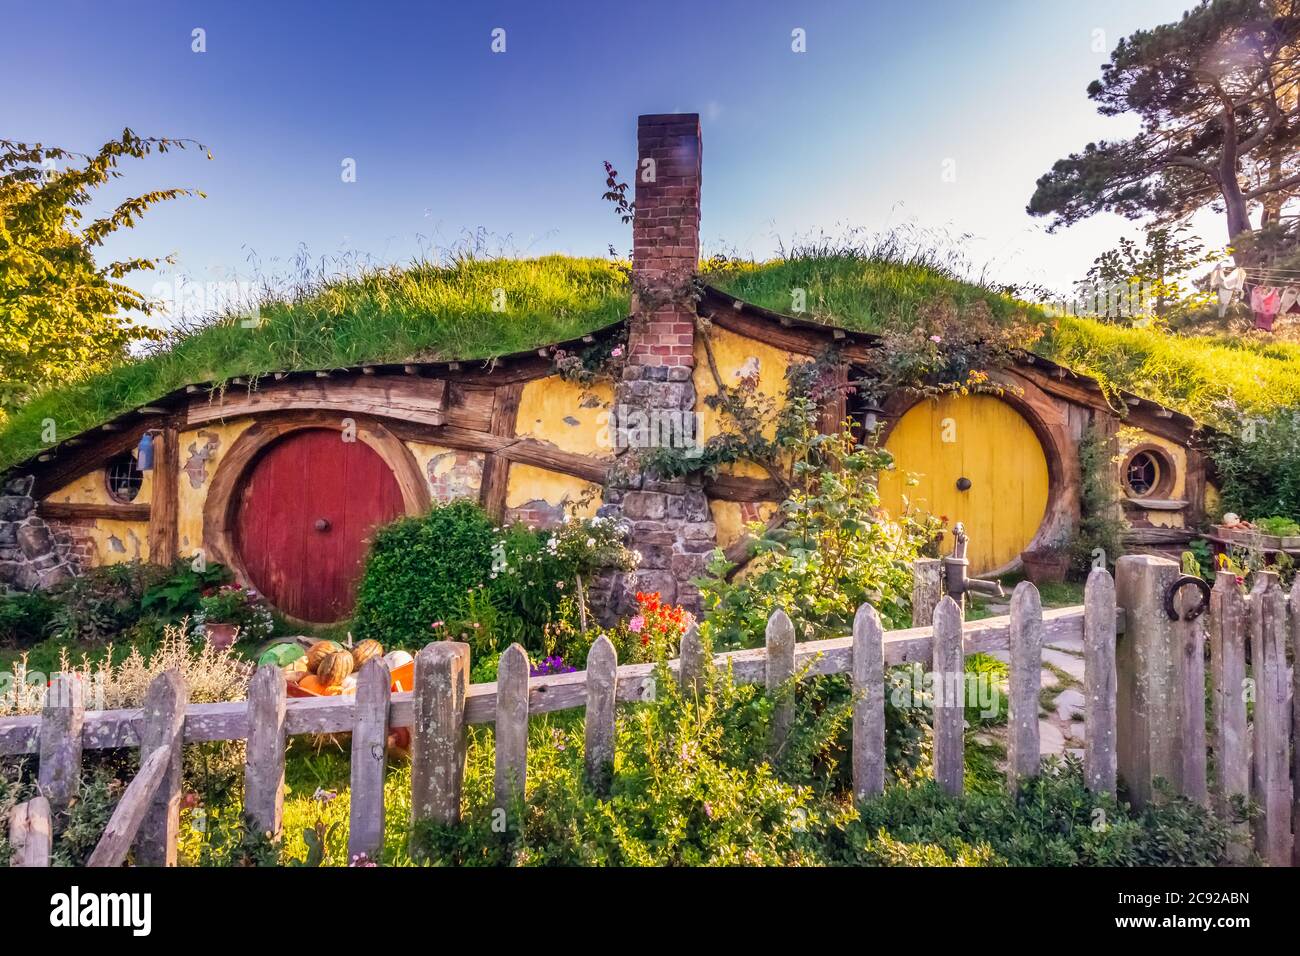 Entrance to the house with round door at the Hobbiton, New Zealand. The place where hobbits live in their holes. Stock Photo